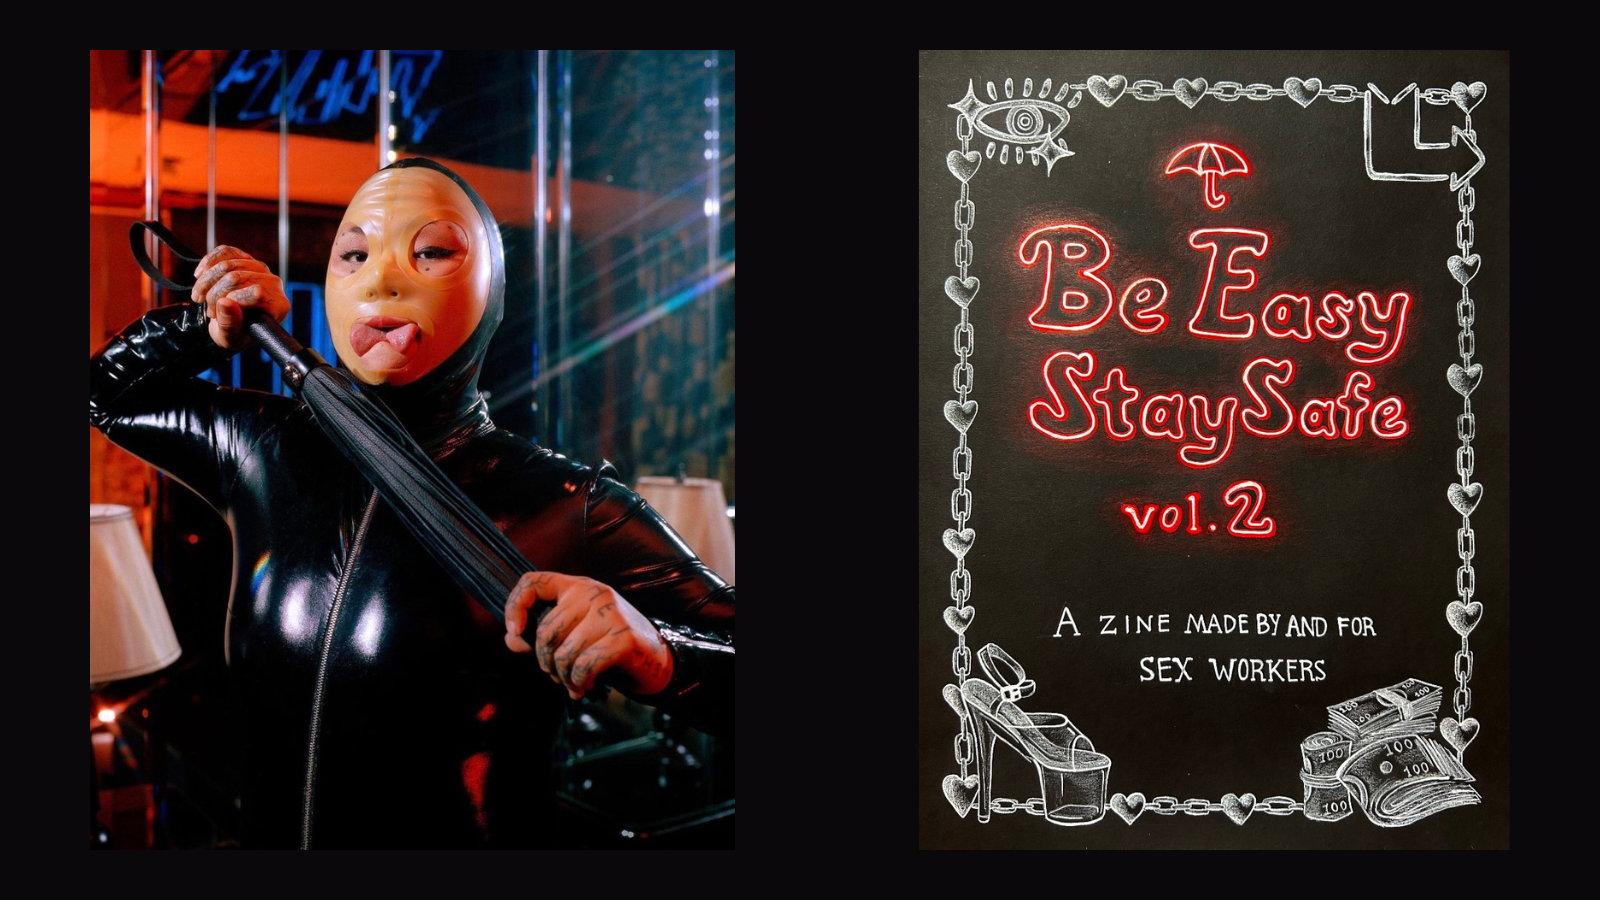 Black tile with two images: 1. Left side is a photo of Domina Jia wearing black latex, a latex face mask and they are sticking out their tongue. They are holding a leather whip. 2. Right image is the cover of their zine 'Be Easy, Stay Safe vol.2' in red font with a black cover. The border of the zine is an illustration in white of heels and cash. 